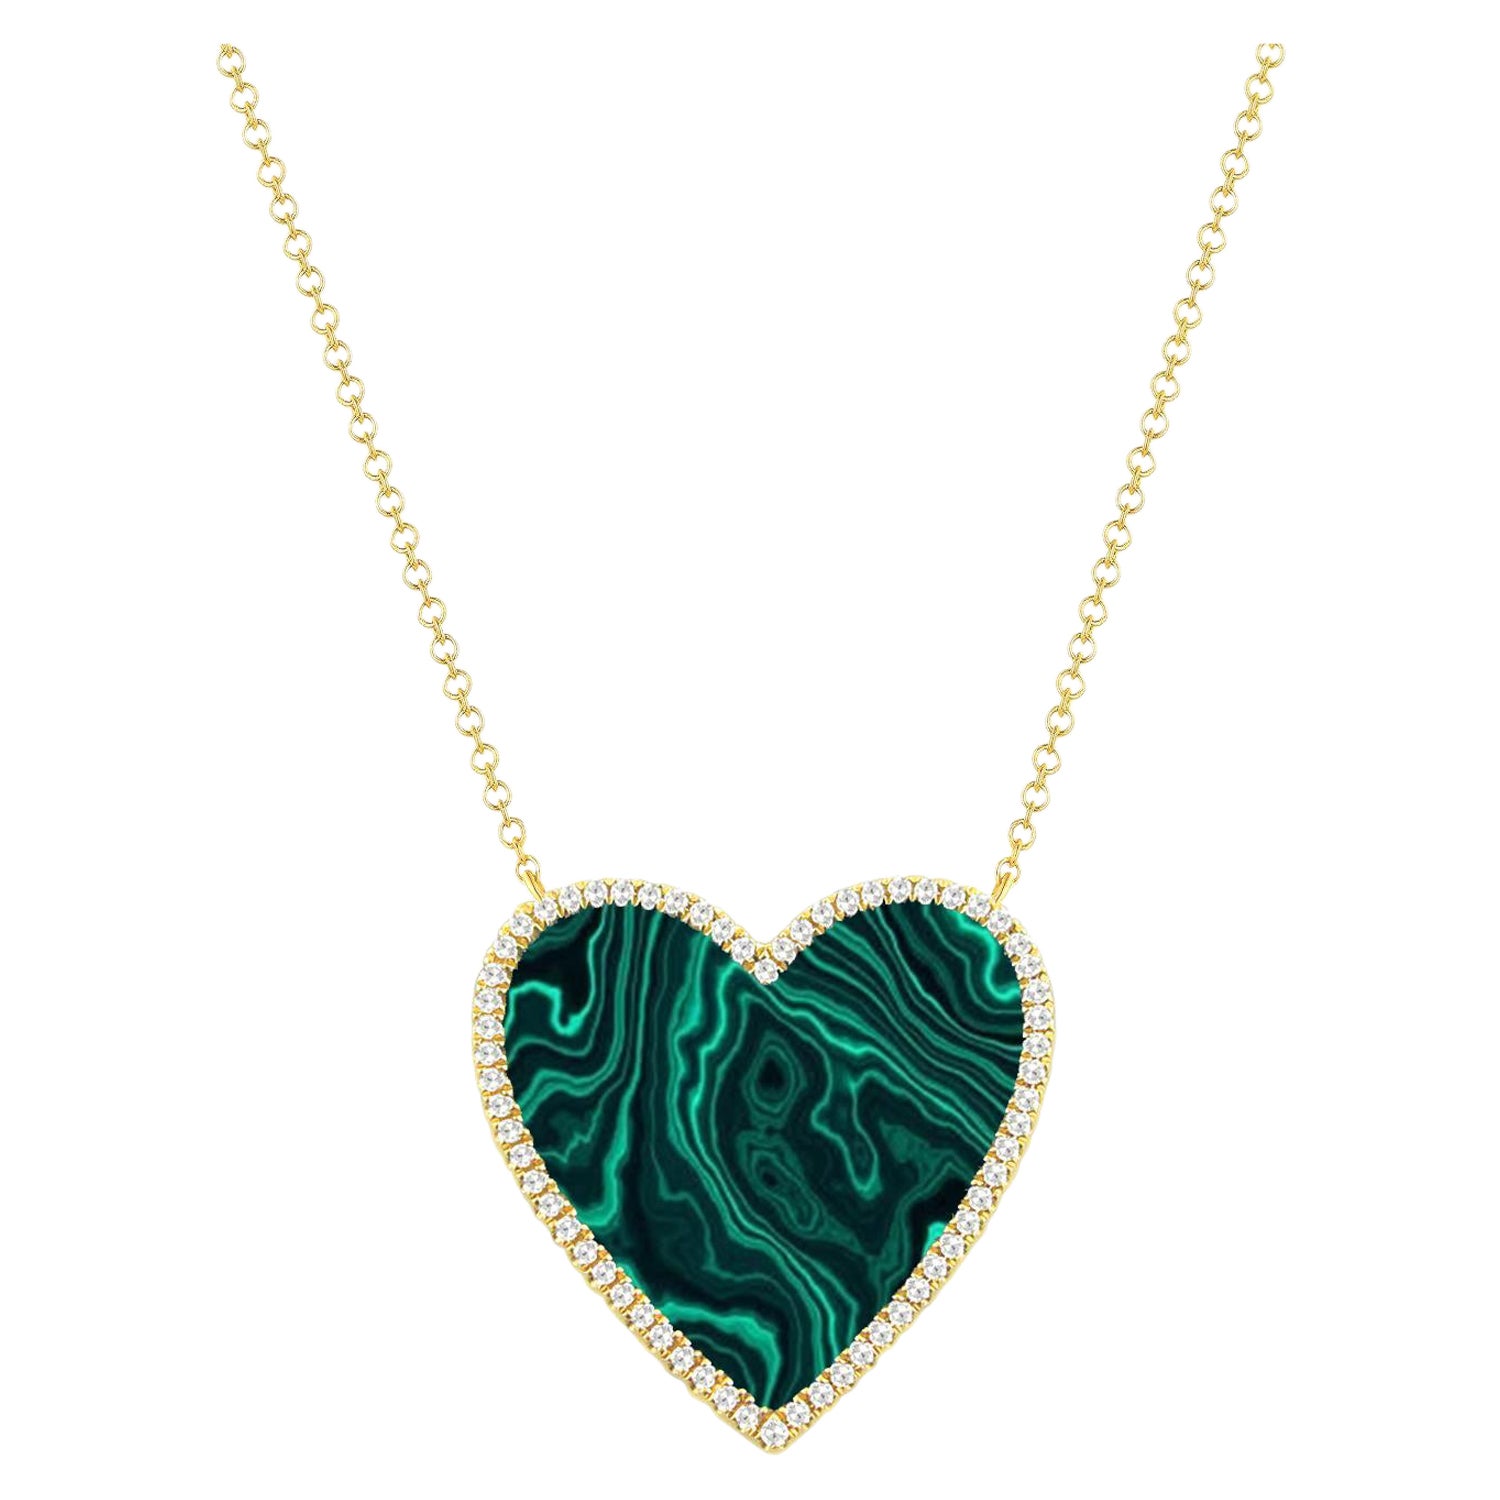 Modern Meadows Reconstituted Green Malachite Heart Pendant Necklace -  JF04108710 - Fossil